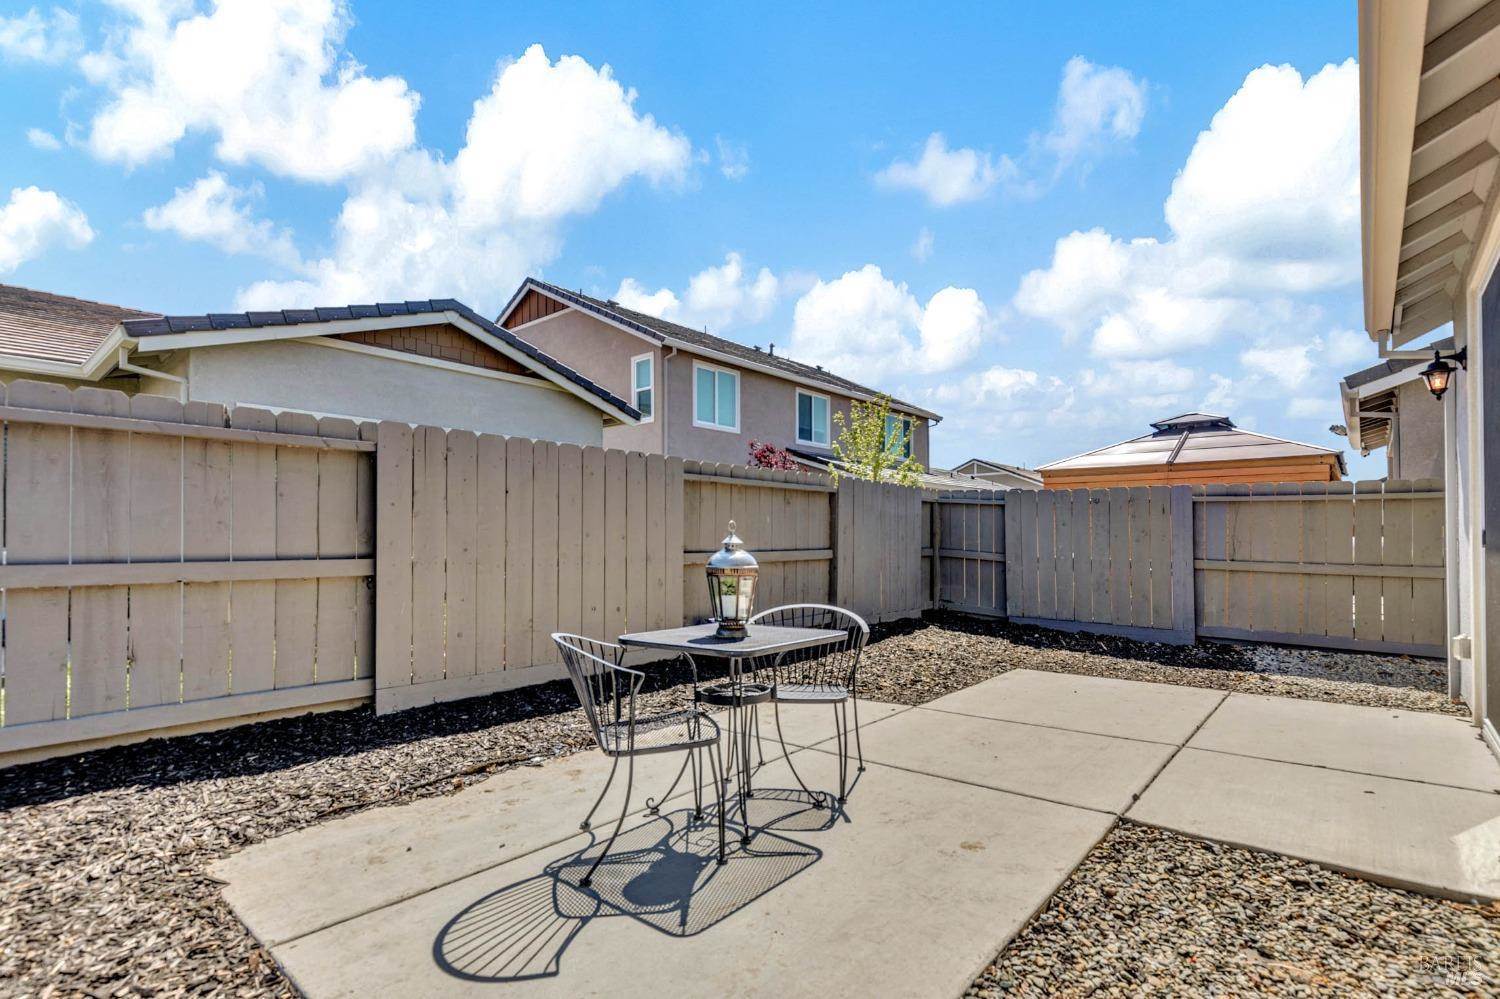 673 Periwinkle Drive, Vacaville, CA 95687